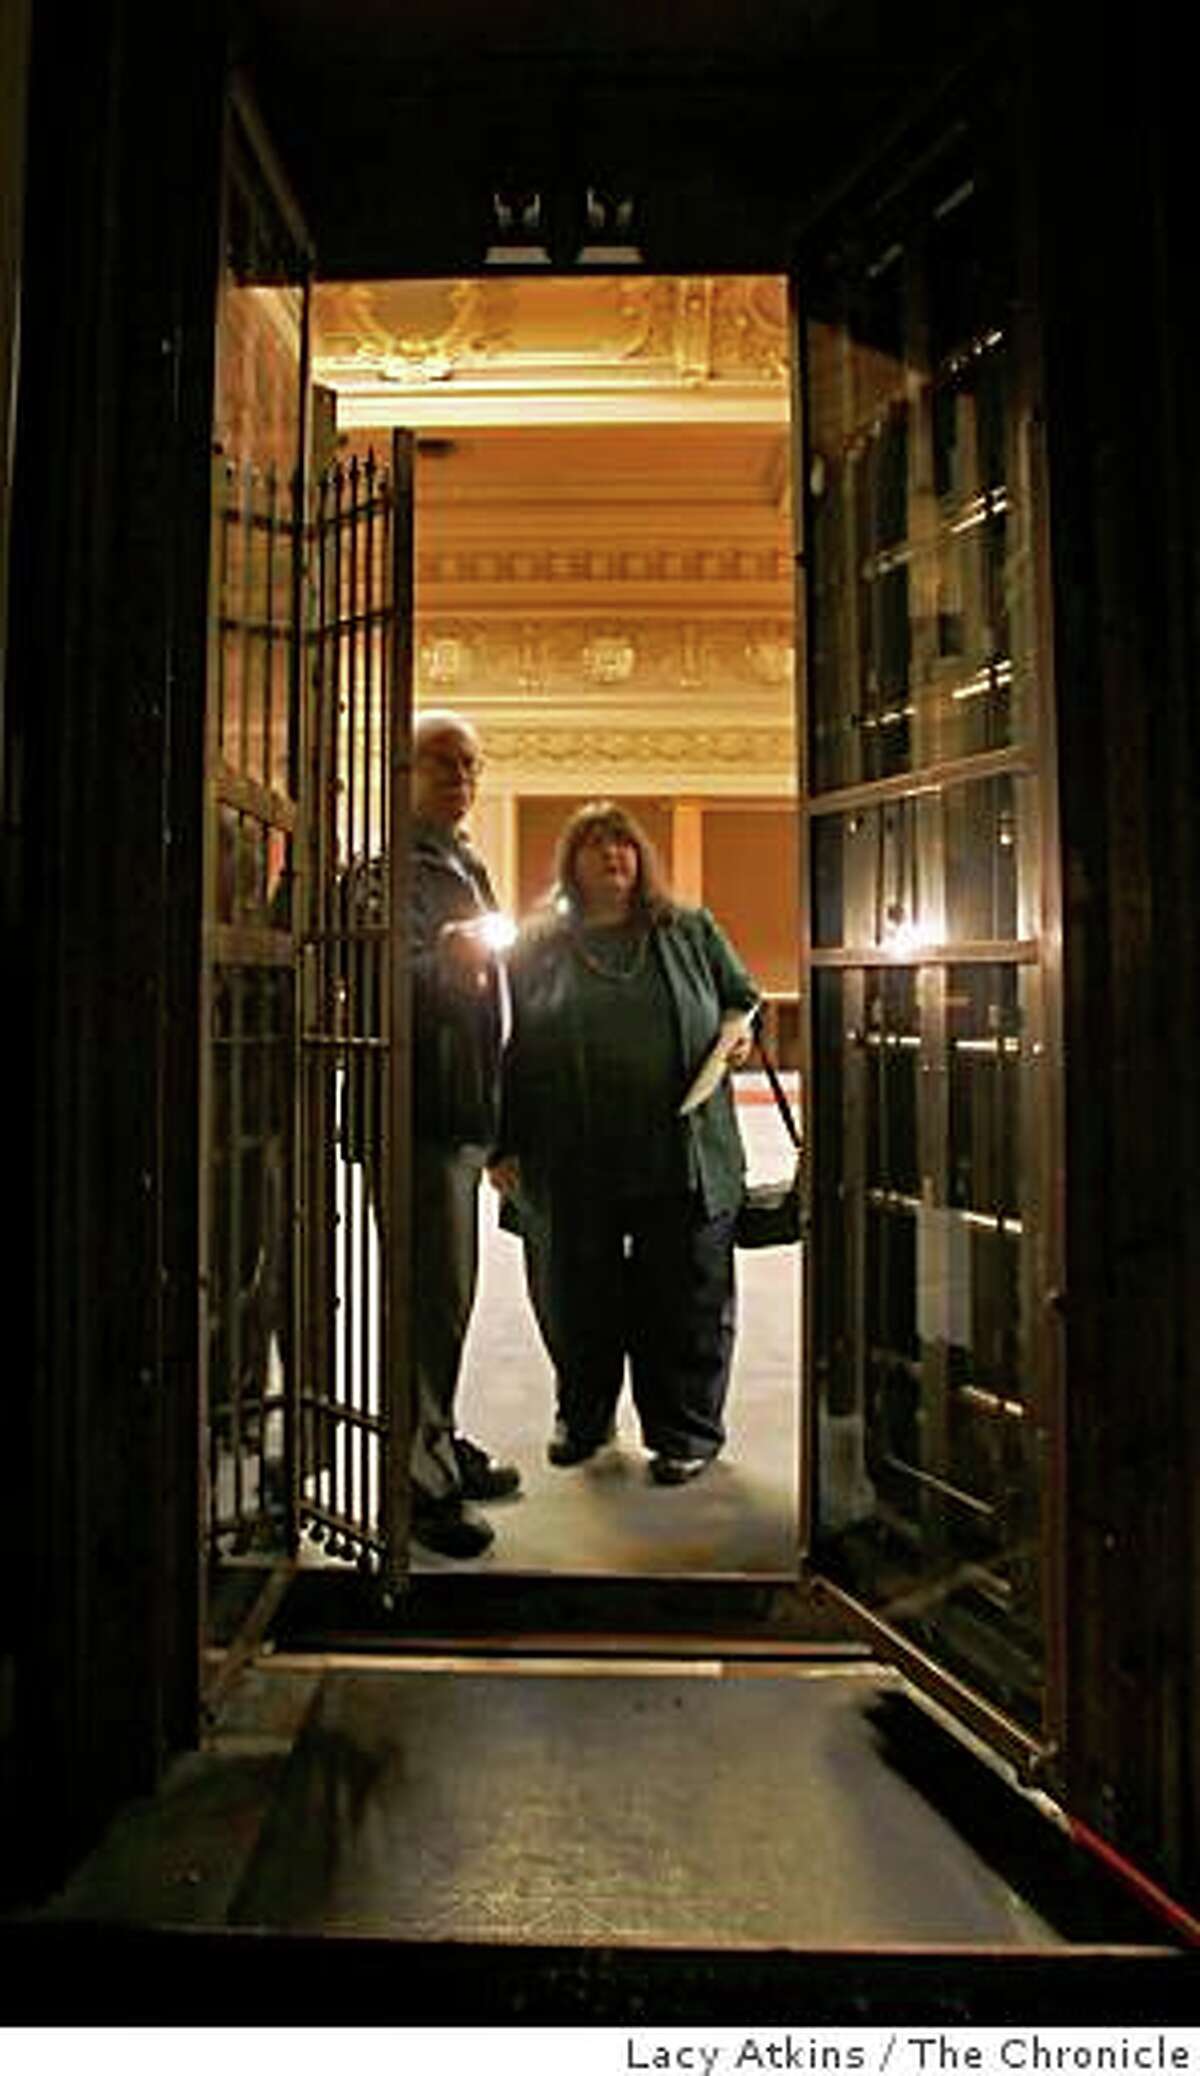 Len Shapiro and Linda Giannecchini look through the vault in the Hibernia Bank building, Tuesday Aug. 19, 2008, in San Francisco, Calif. The building is up for sale for 3.99 million dollars and people are consider it as a cultural center, a home for various arts and entertainment museums, and a cornerstone to the revitalized Upper Market/Tenderloin/Civic Center districts.